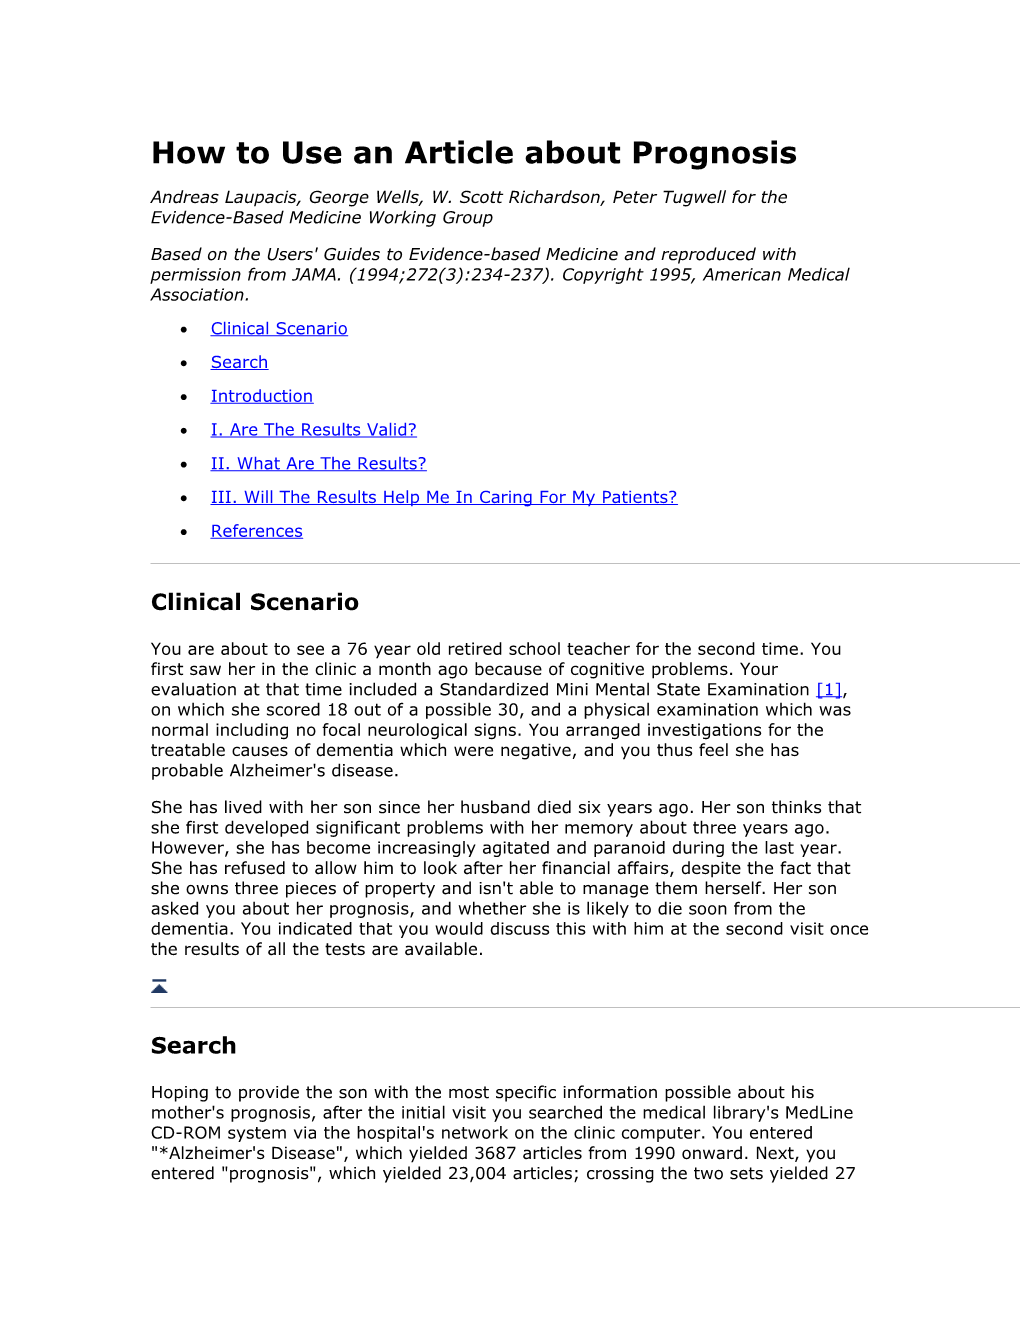 How to Use an Article About Prognosis